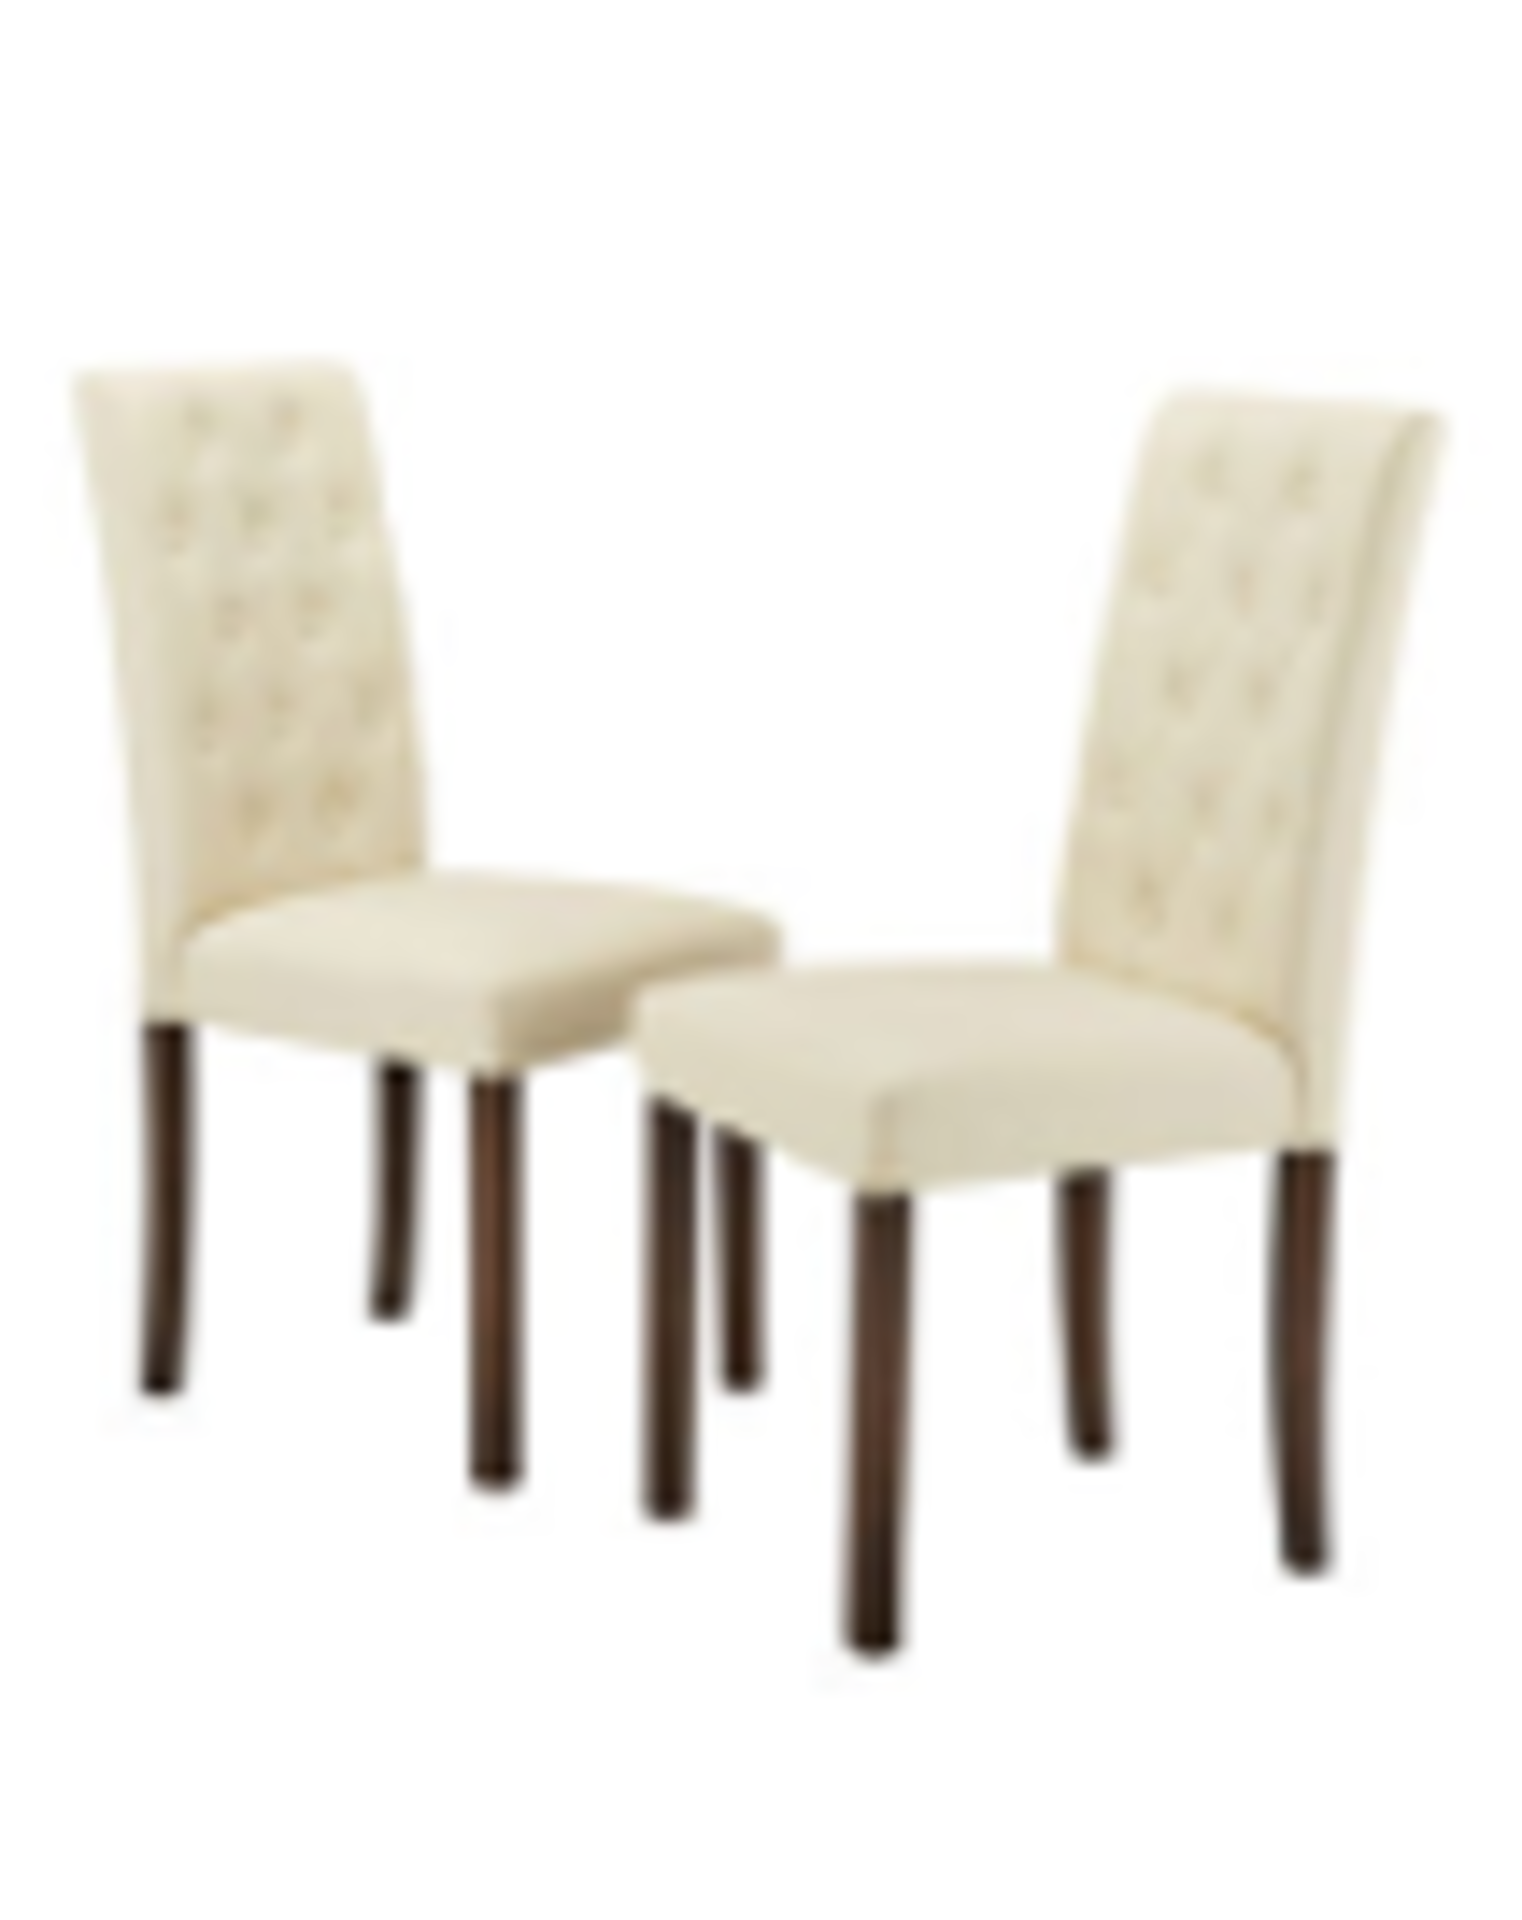 NEW BOXED Grace Faux Leather Pair of Dining Chairs. RRP £239. (ROW9) CREAM/DARK LEG